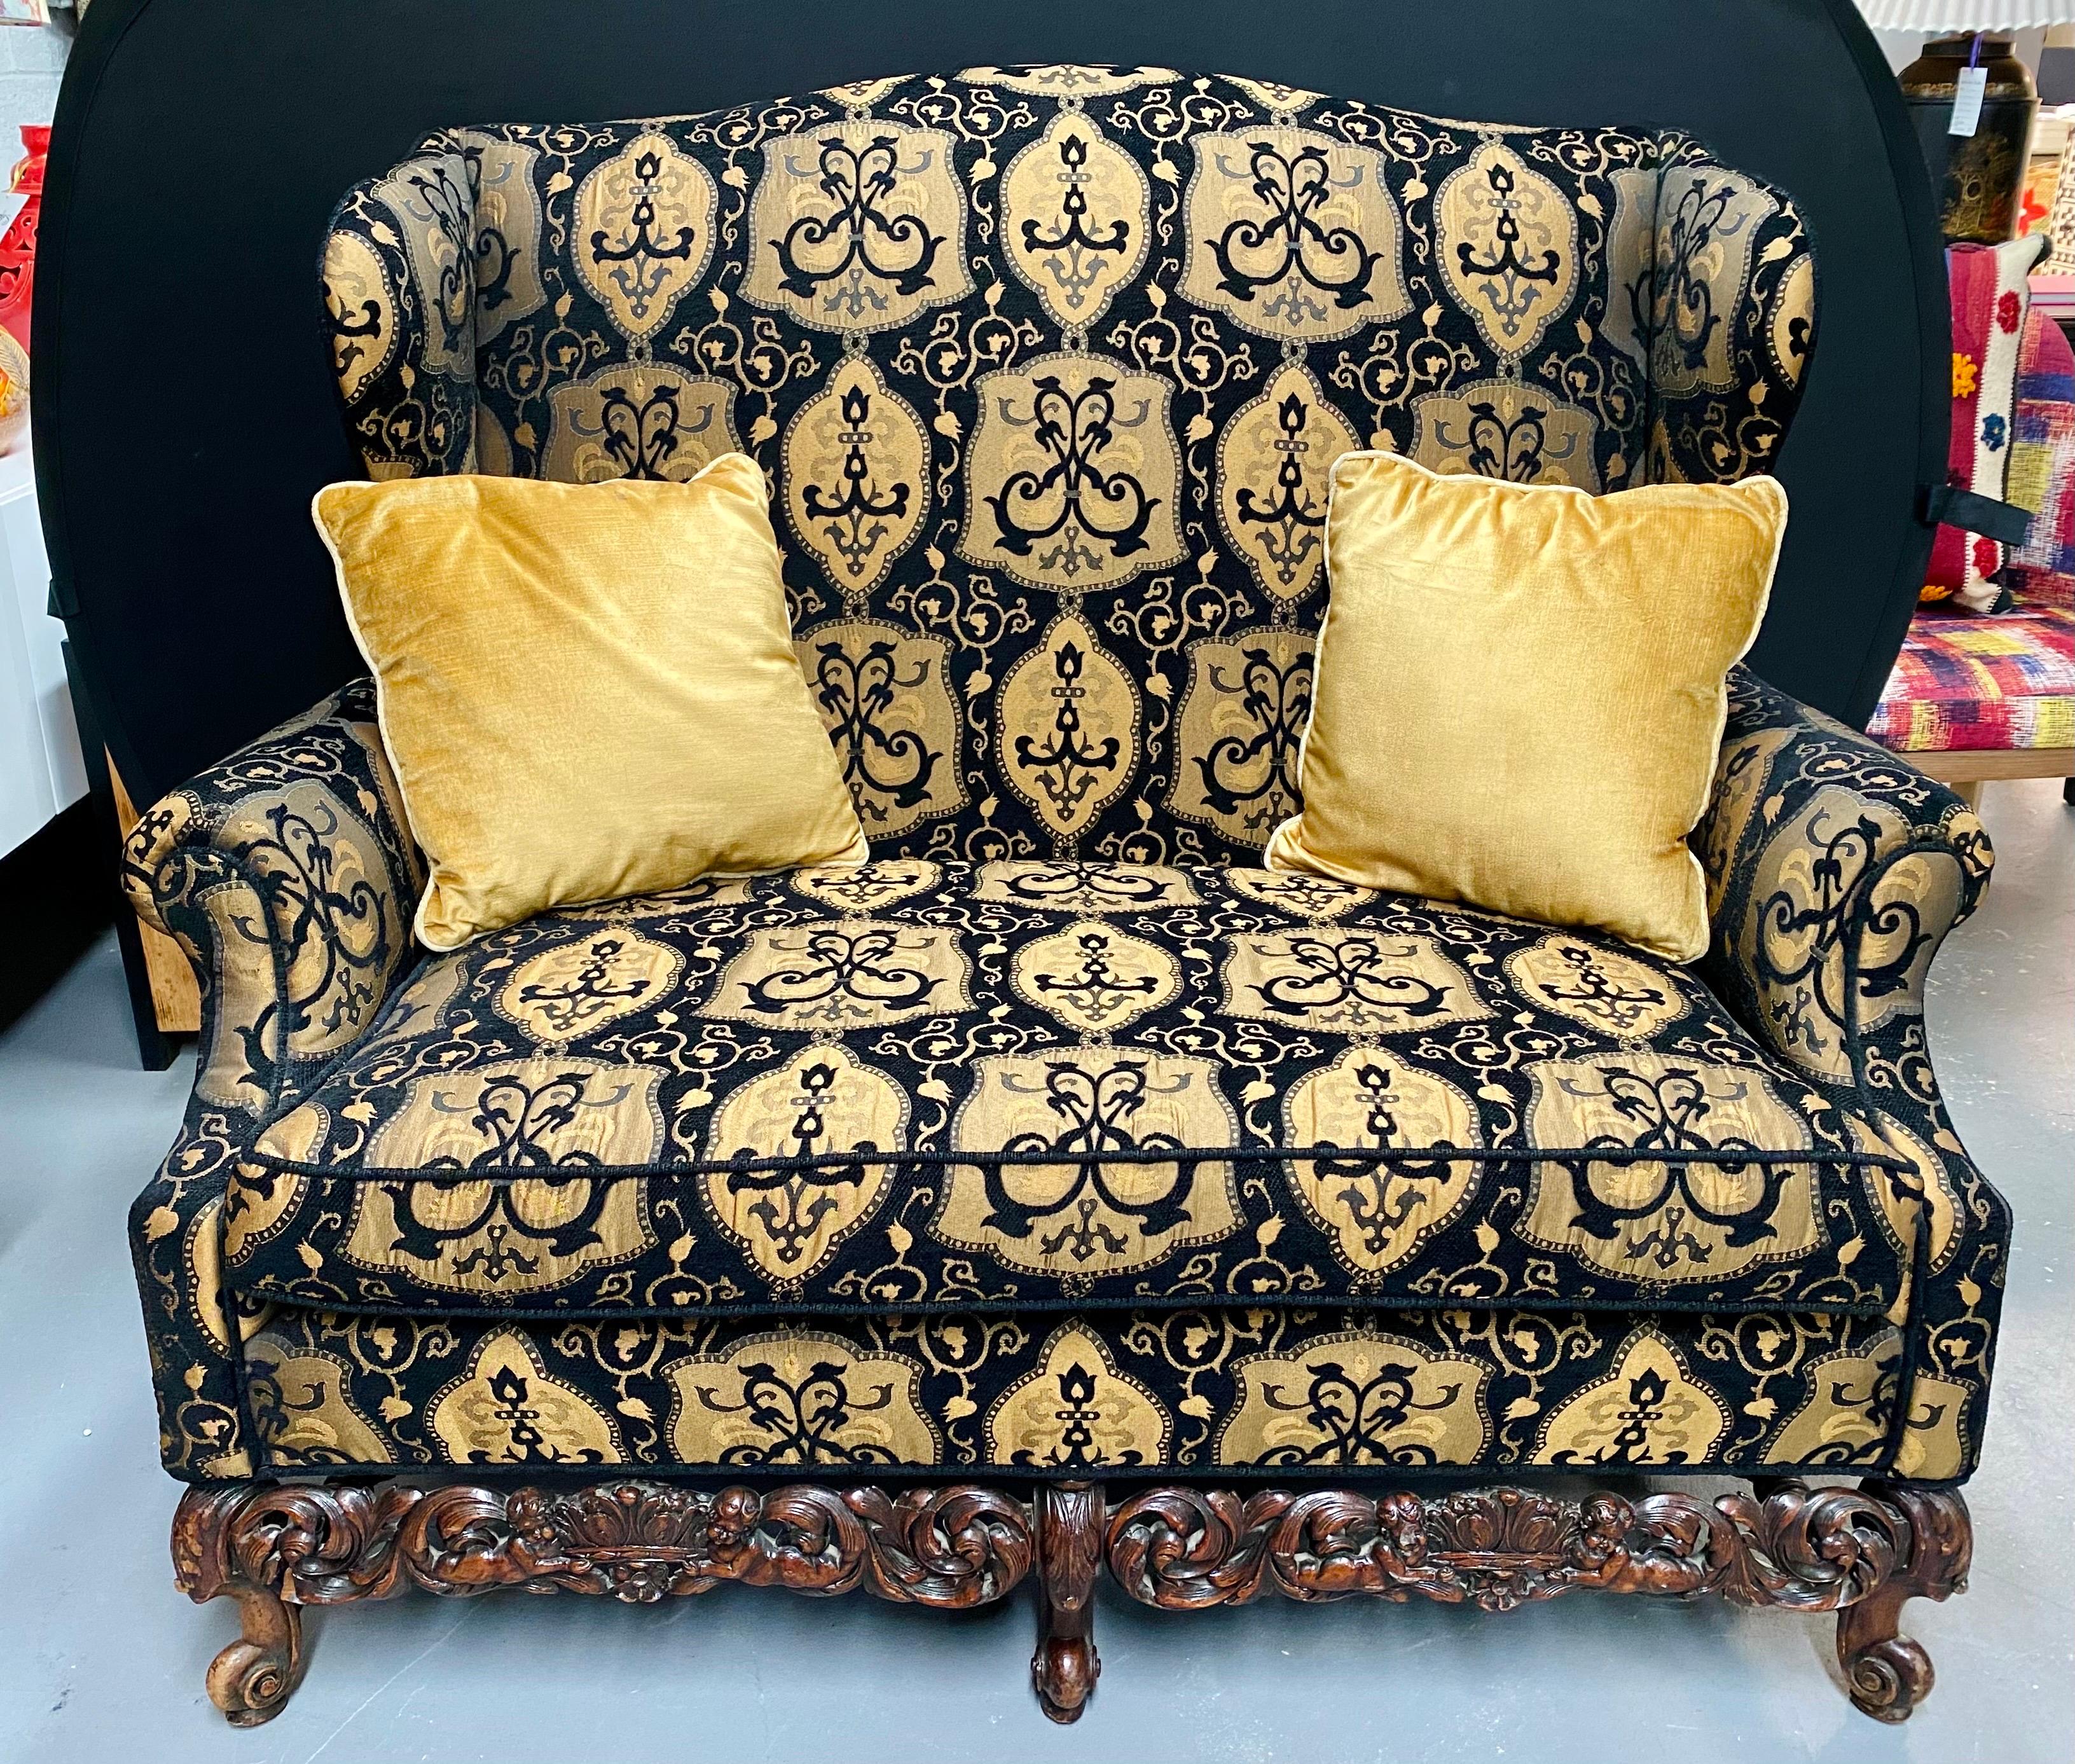 19th-early 20th century settee / canape or loveseat in Rococo style having a fine Fabric. This is simply the finest find of wonderfully covered and carved oversized settee or canape anyone could wish to have. The detailed carvings on the lower frame